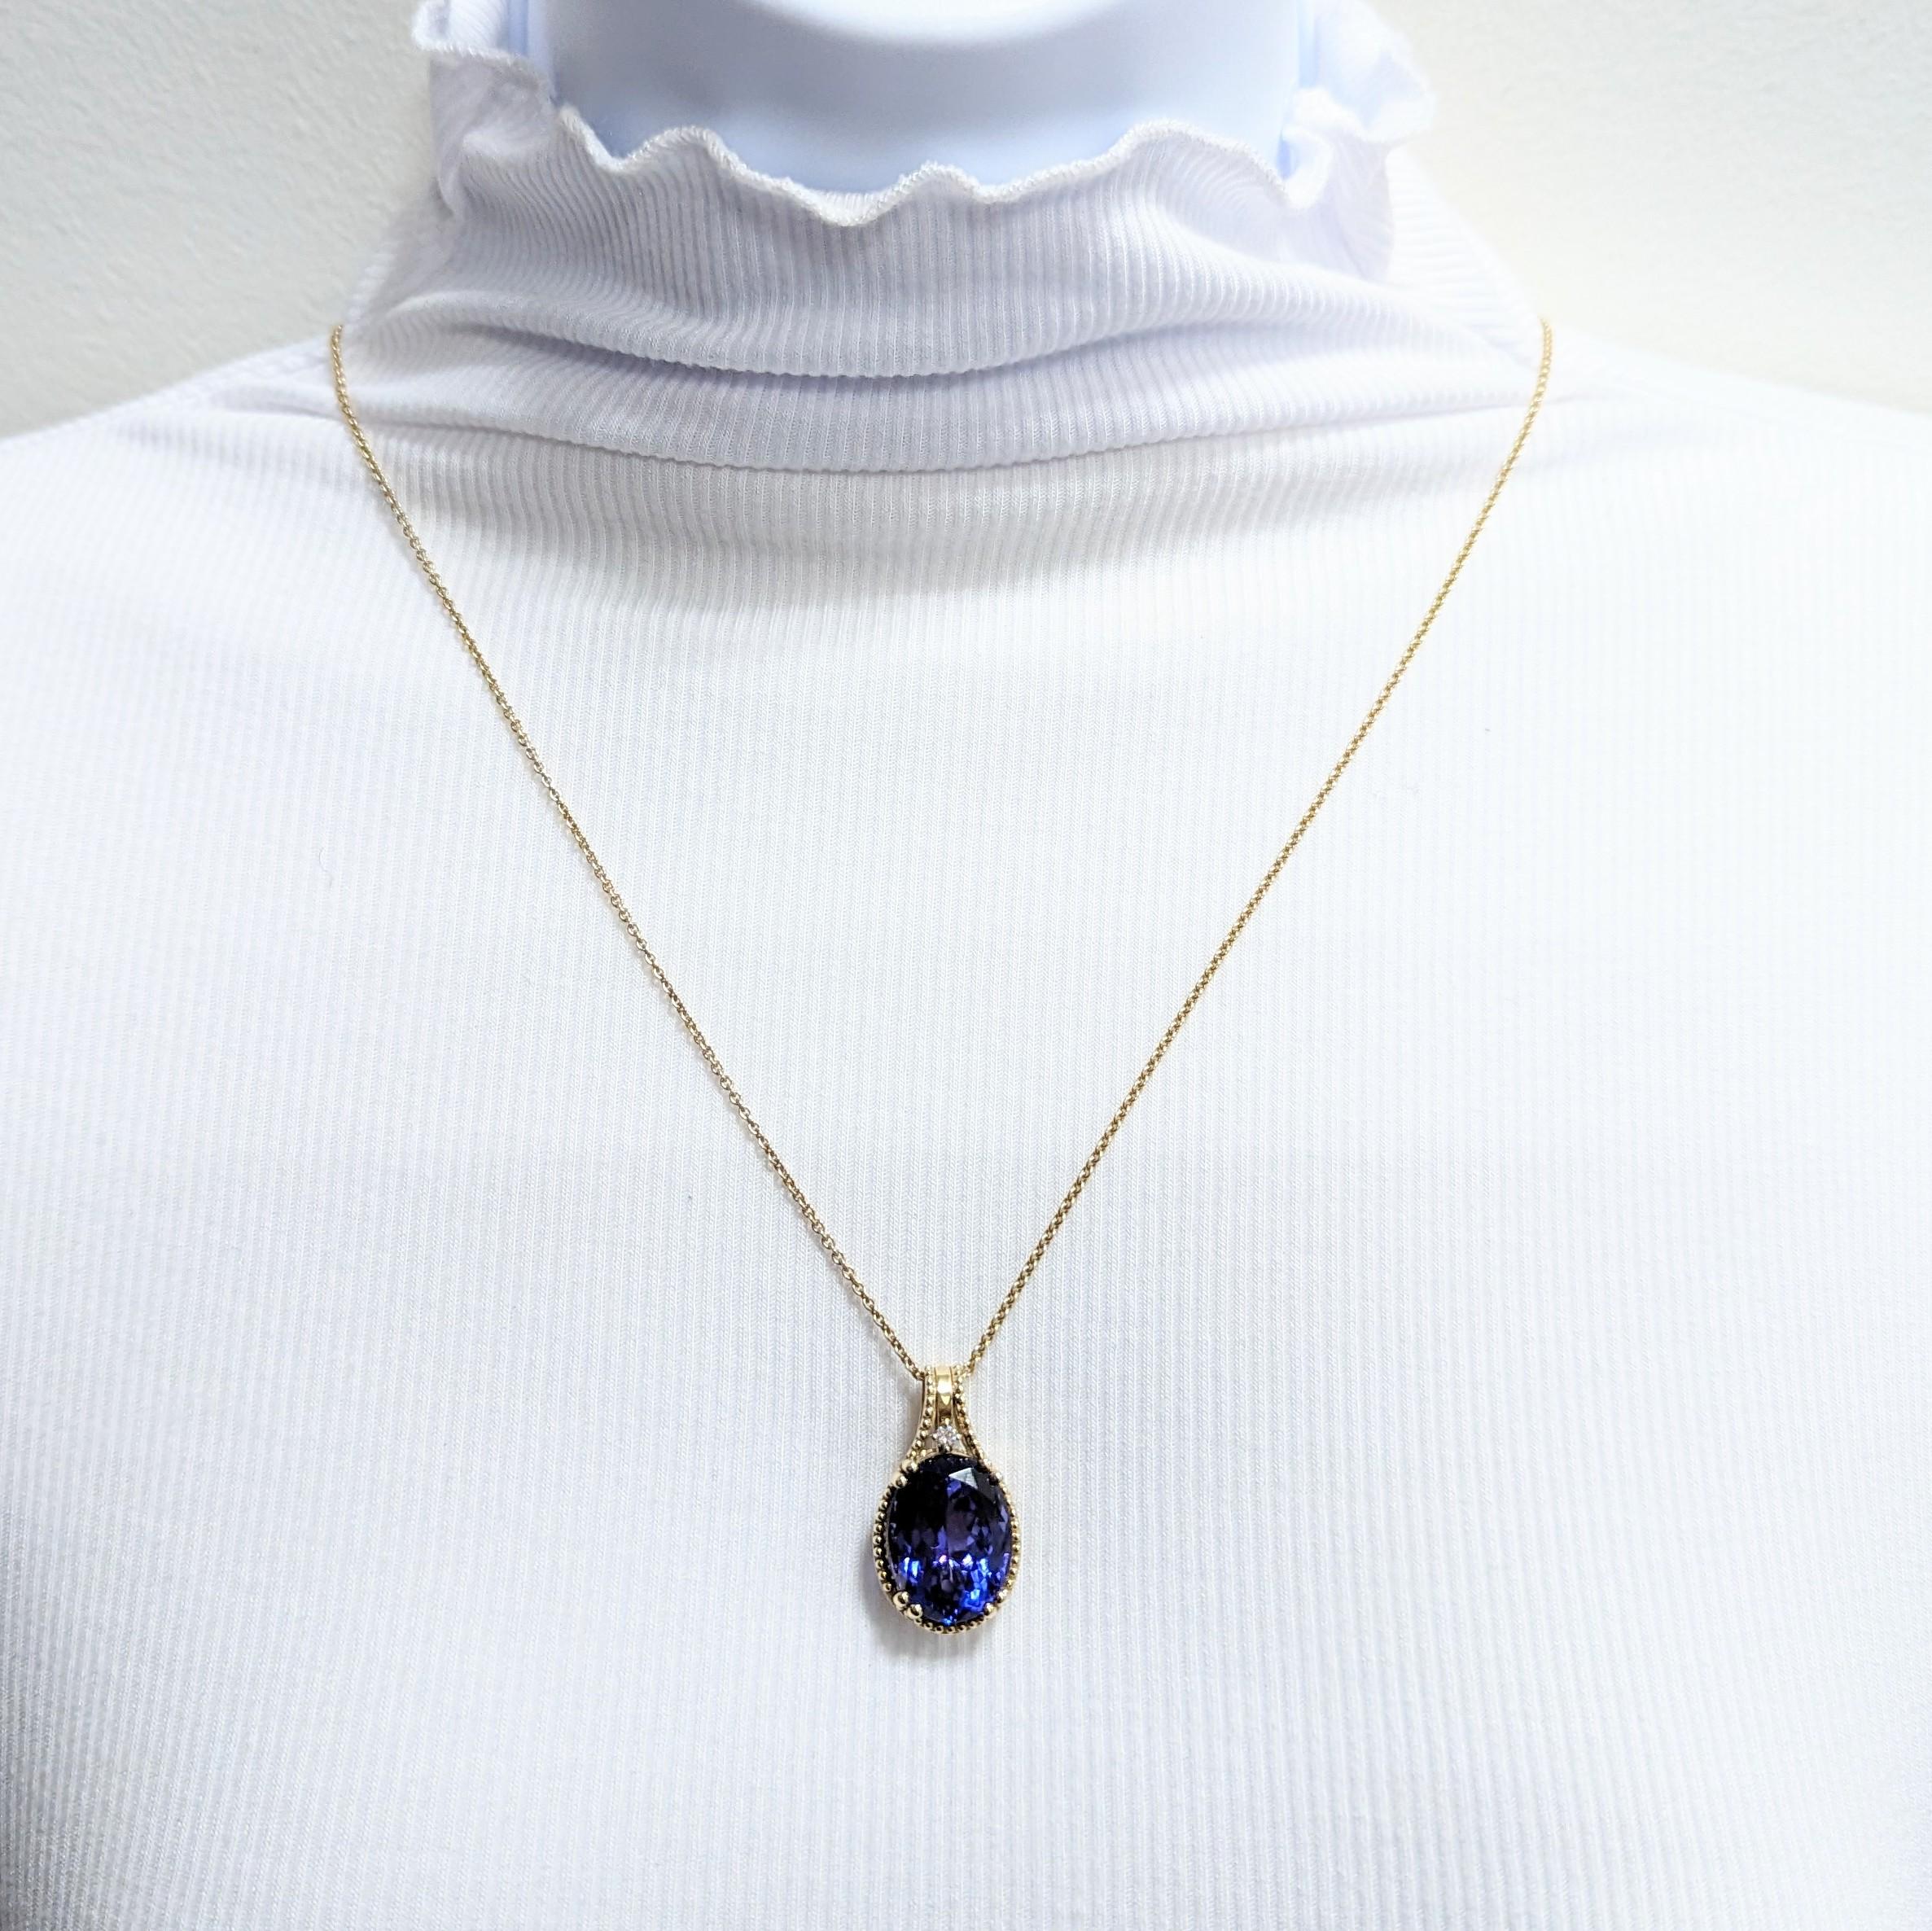 Beautiful 15.45 ct. tanzanite oval with 0.05 ct. white diamond rounds.  Handmade in 14k yellow gold.  Length is 18